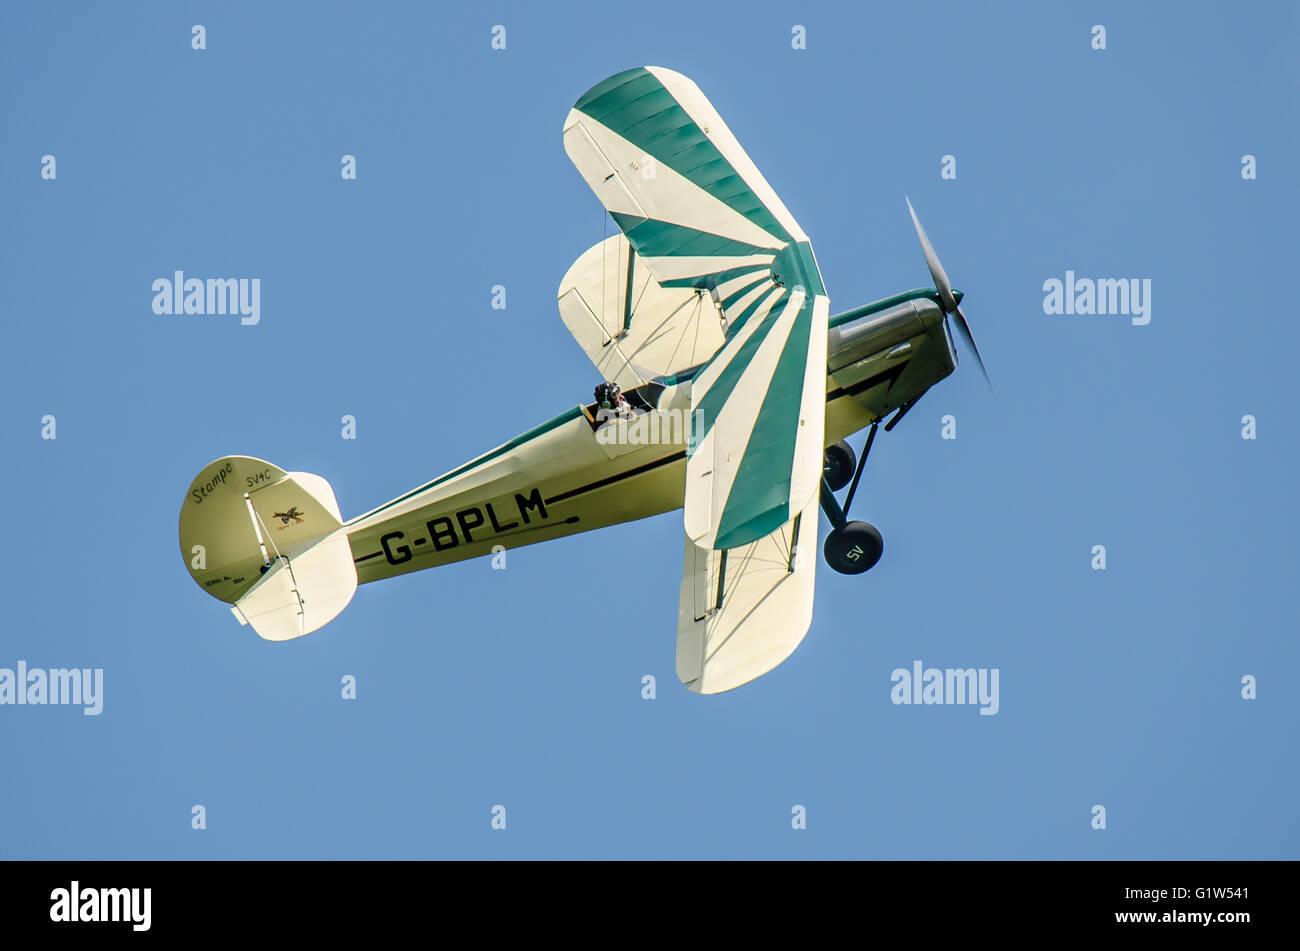 The Stampe SV.4 was designed as a biplane tourer/training aircraft in the early 1930s by Stampe et Vertongen at Antwerp. Stock Photo